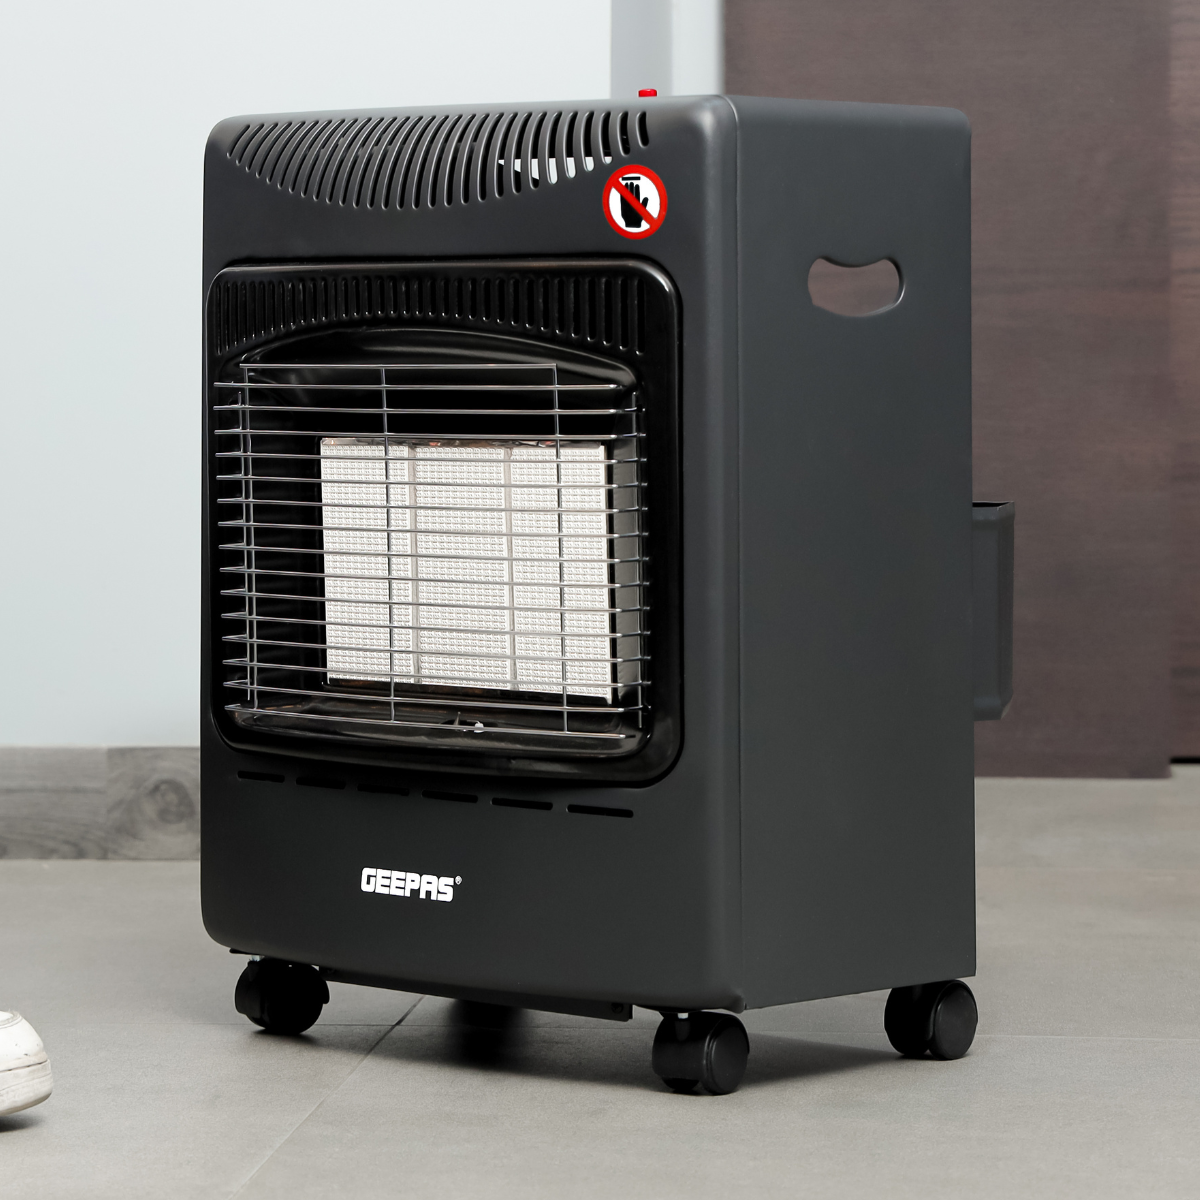 The Benefits Of Using Gas Heaters